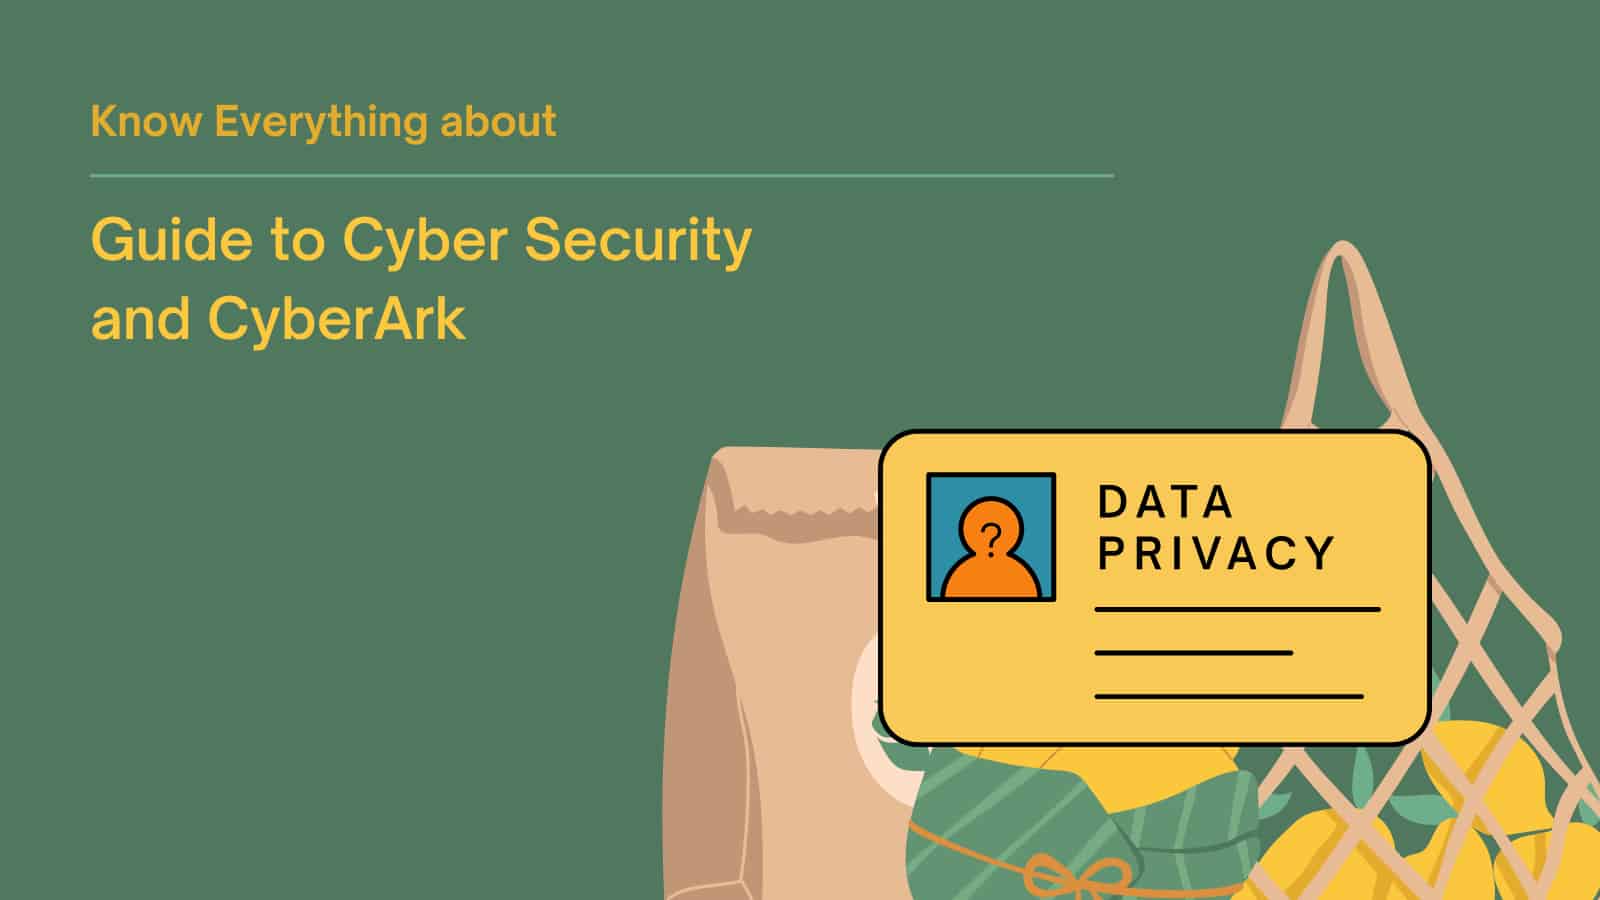 Guide to Cyber Security and CyberArk